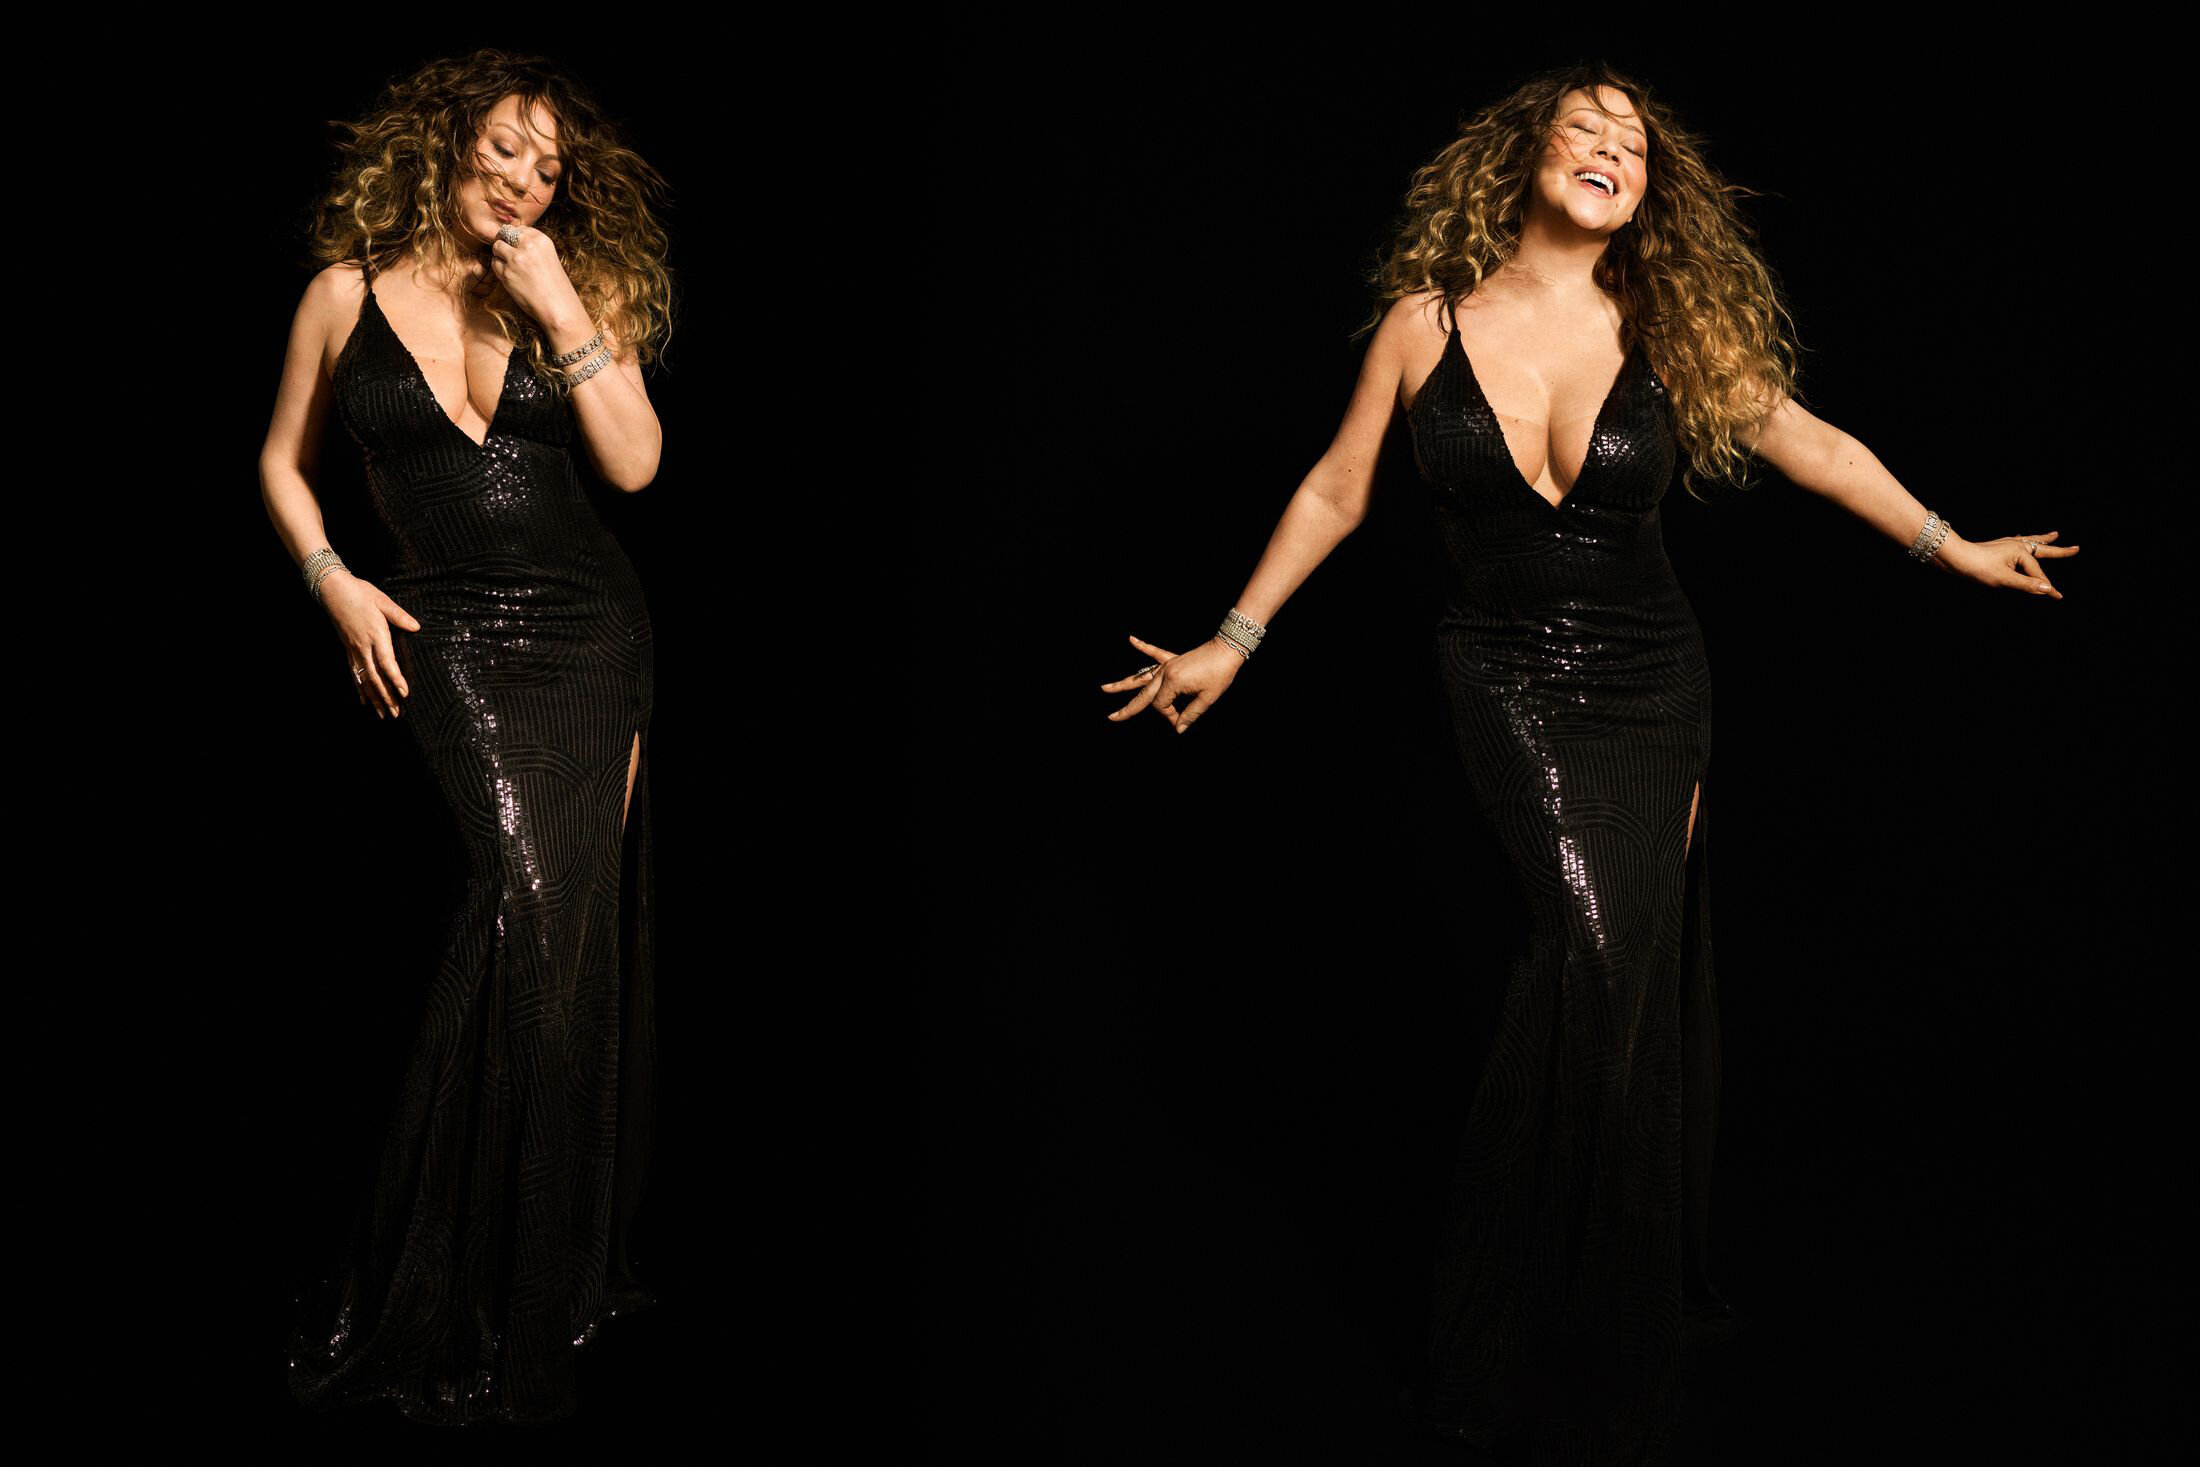   Dana Scruggs  photographed Mariah Carey for the cover of New York Magazine in August 2020. Styling by Jason Rembert. Hair by Serge Normant. Makeup by Kristofer Buckle. Manicure by Deborah Lippmann. Dressmaking by Nile Cmylo. Styling Assistance by C